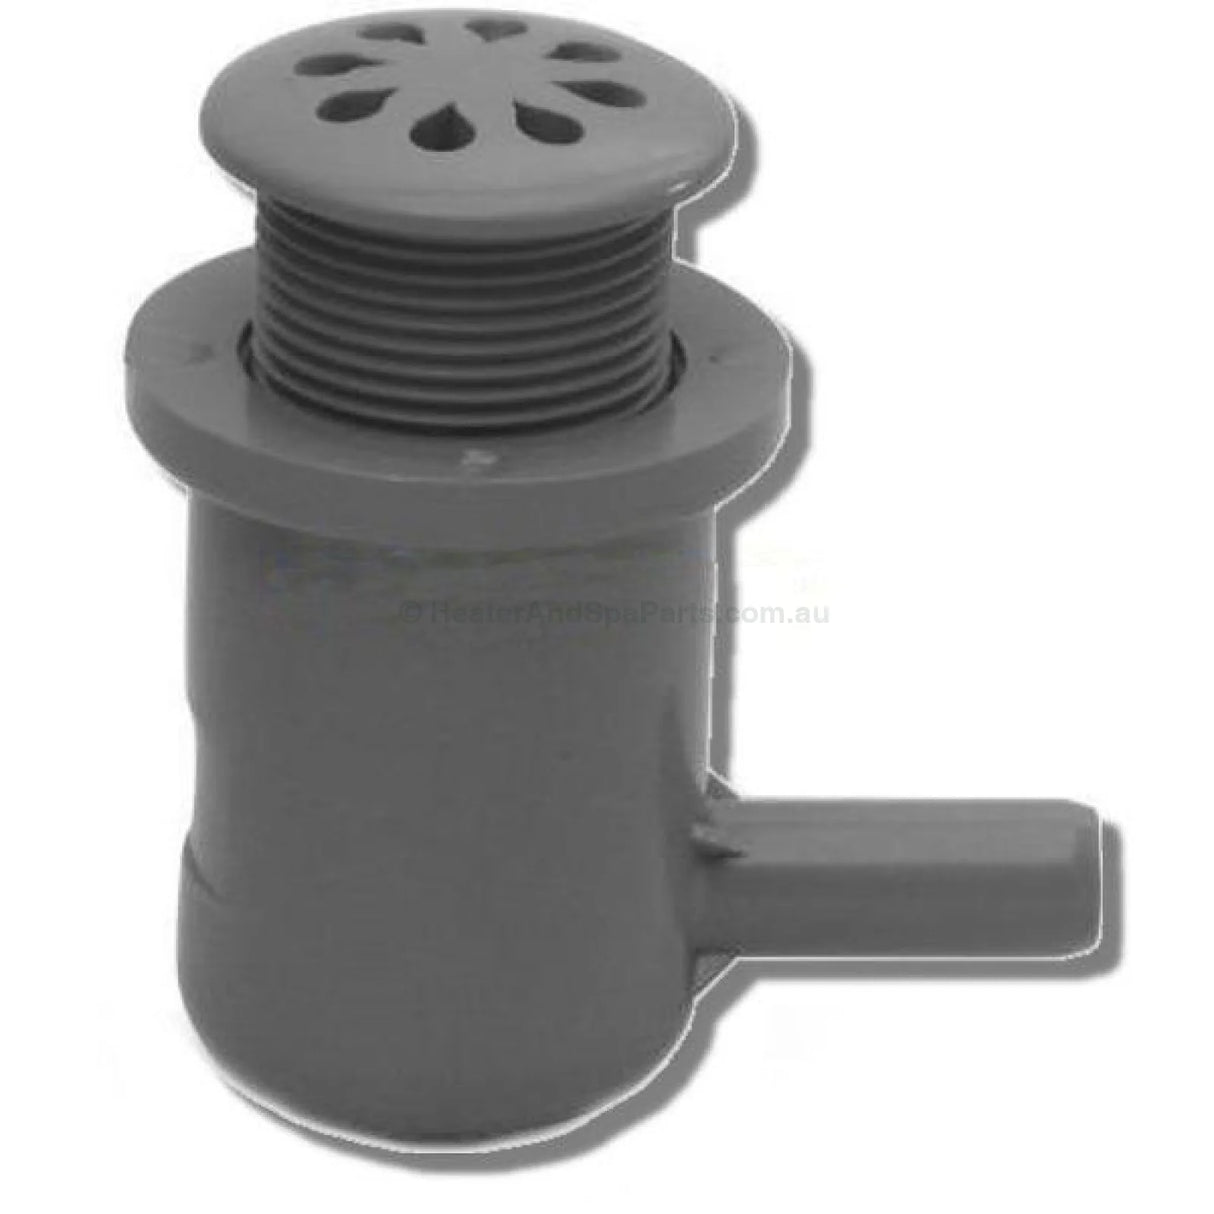 30mm x 39mm(D) Air Injector Jet for Spa Industries Spas - Signature Designer Leisurite Bullfrog - Heater and Spa Parts